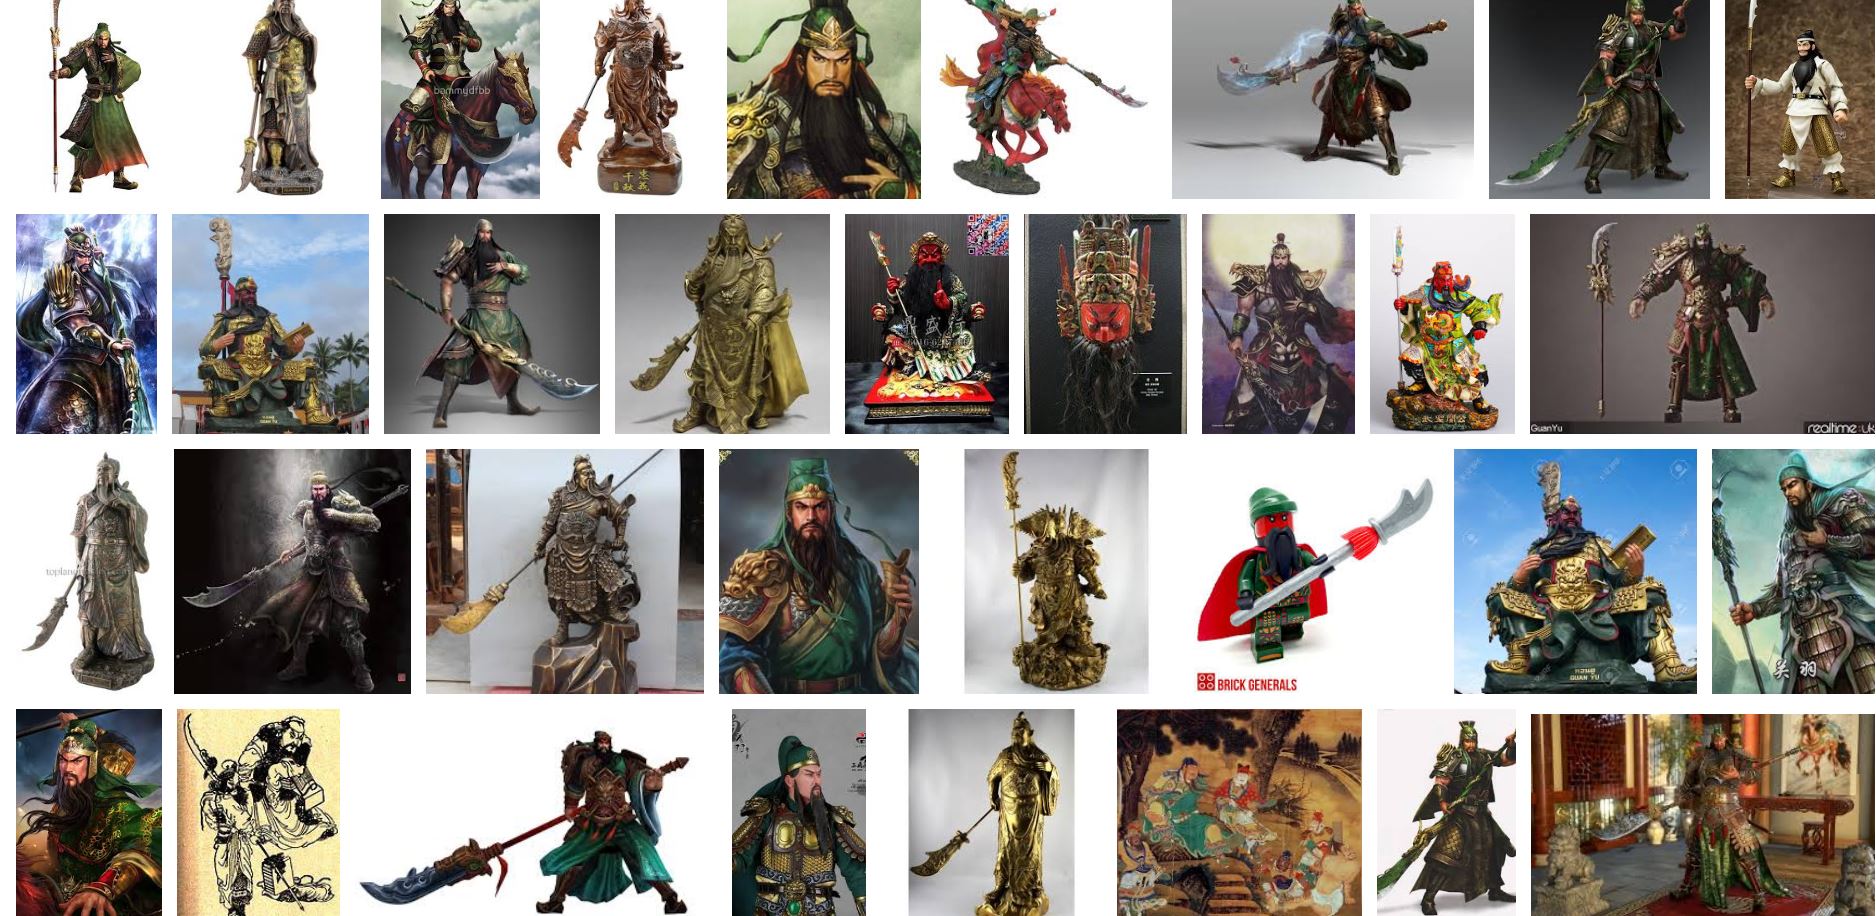 Guan Yu, as shown in a Google picture search.